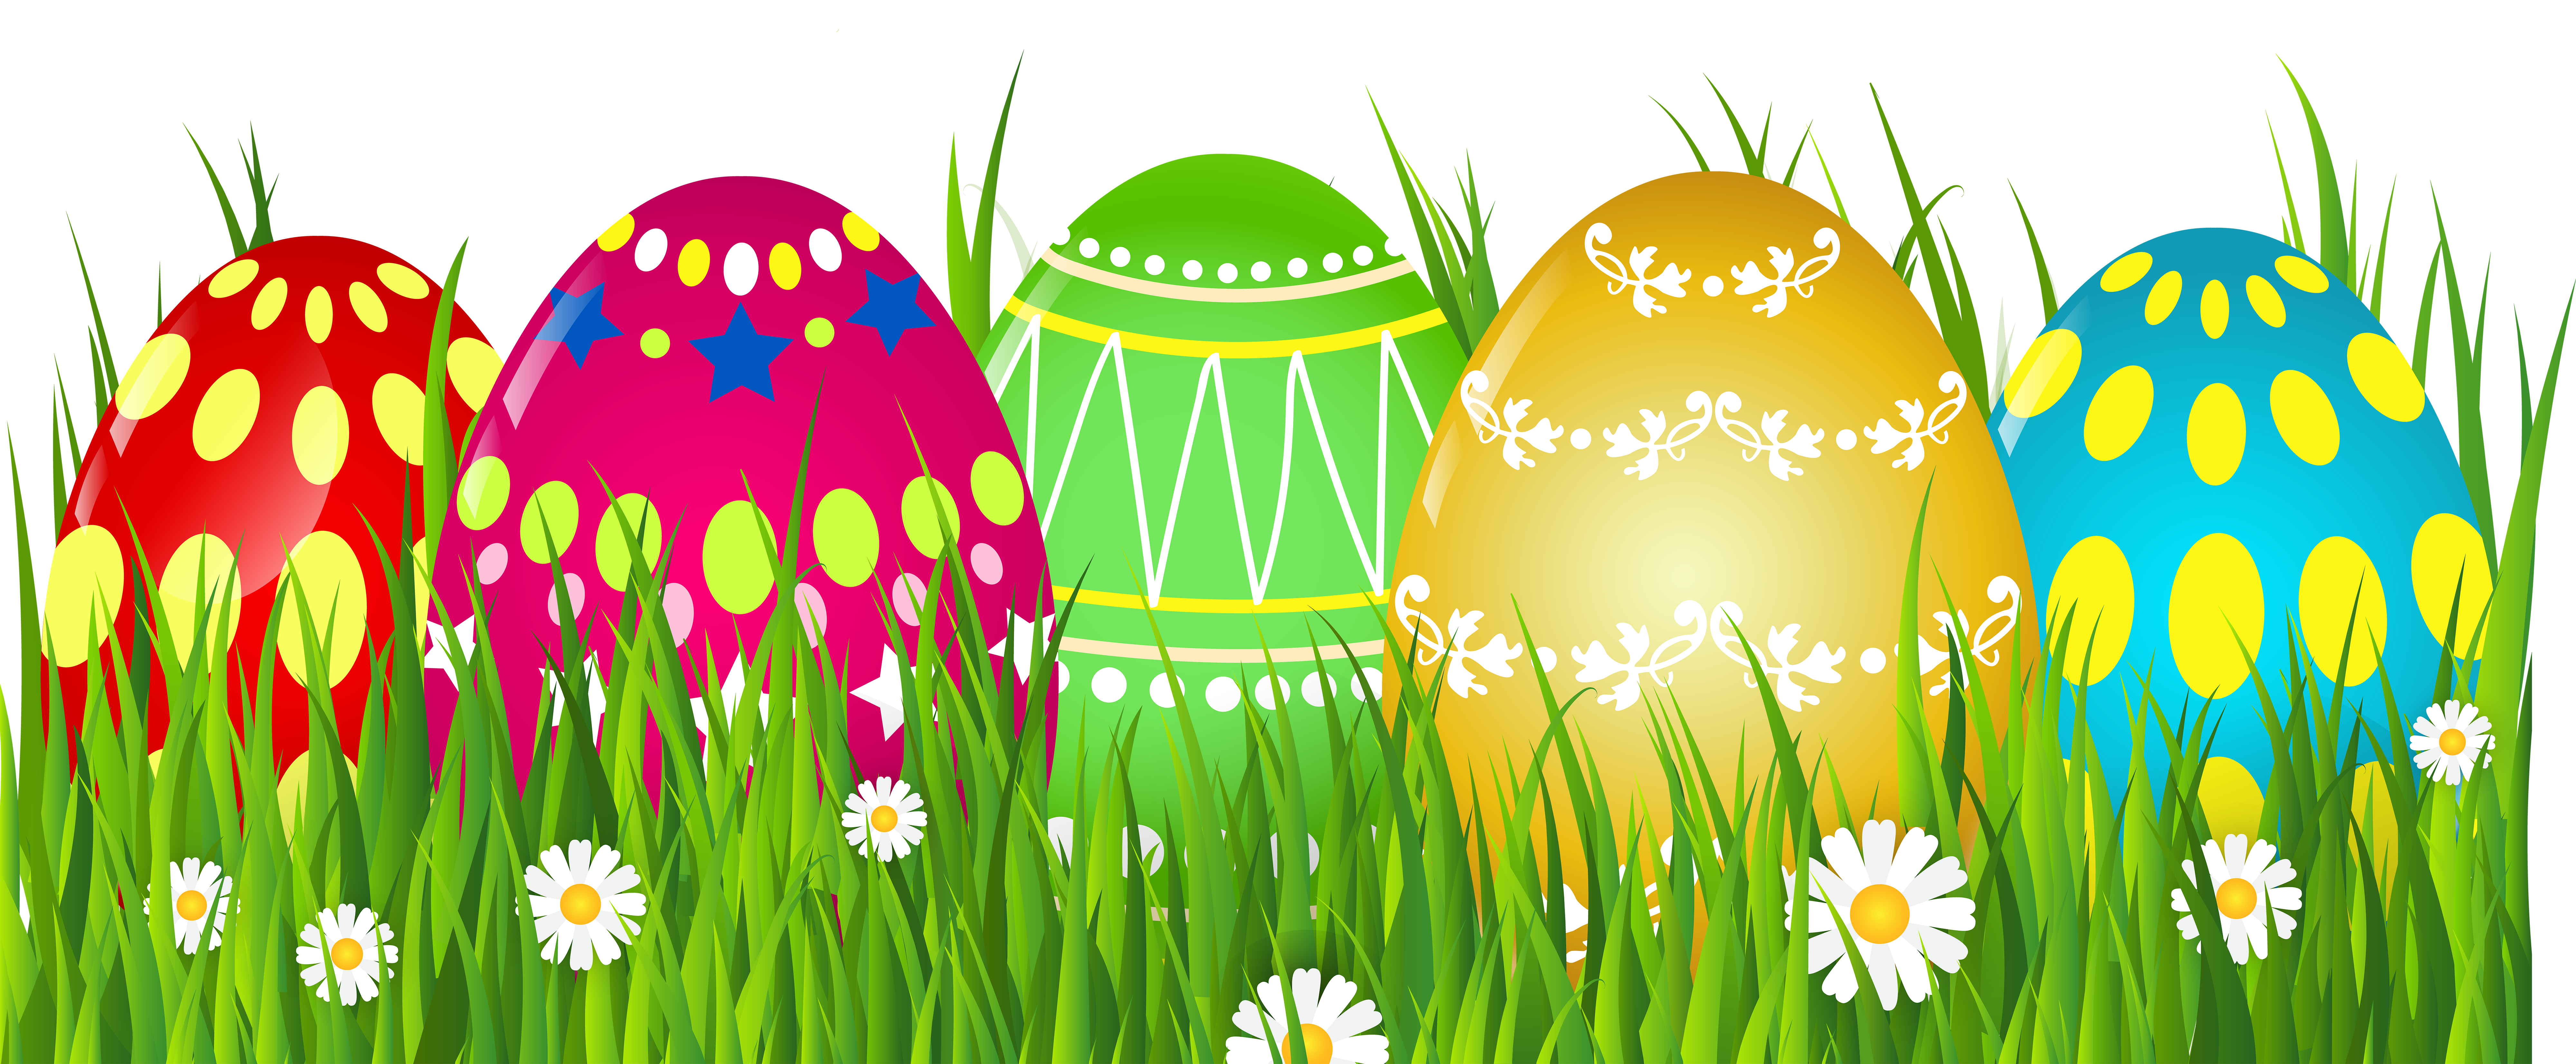 Easter Grass Clipart Image